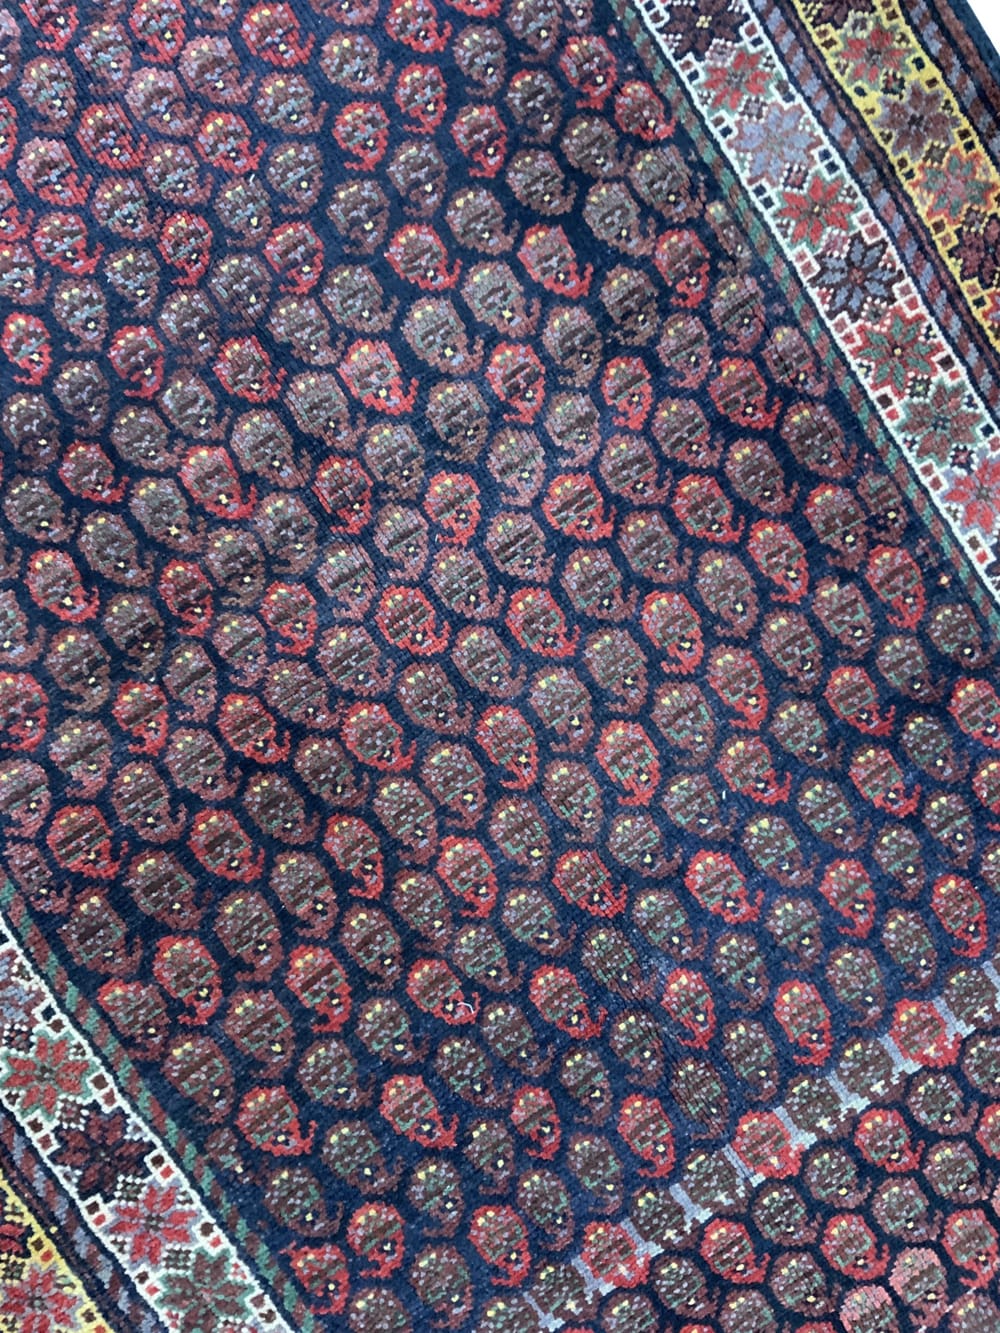 Rug#10576 Antique Caucasian, Day-Bed rug, circa1900, all wool rare & collectable, Persia, size 253x124cm (6)